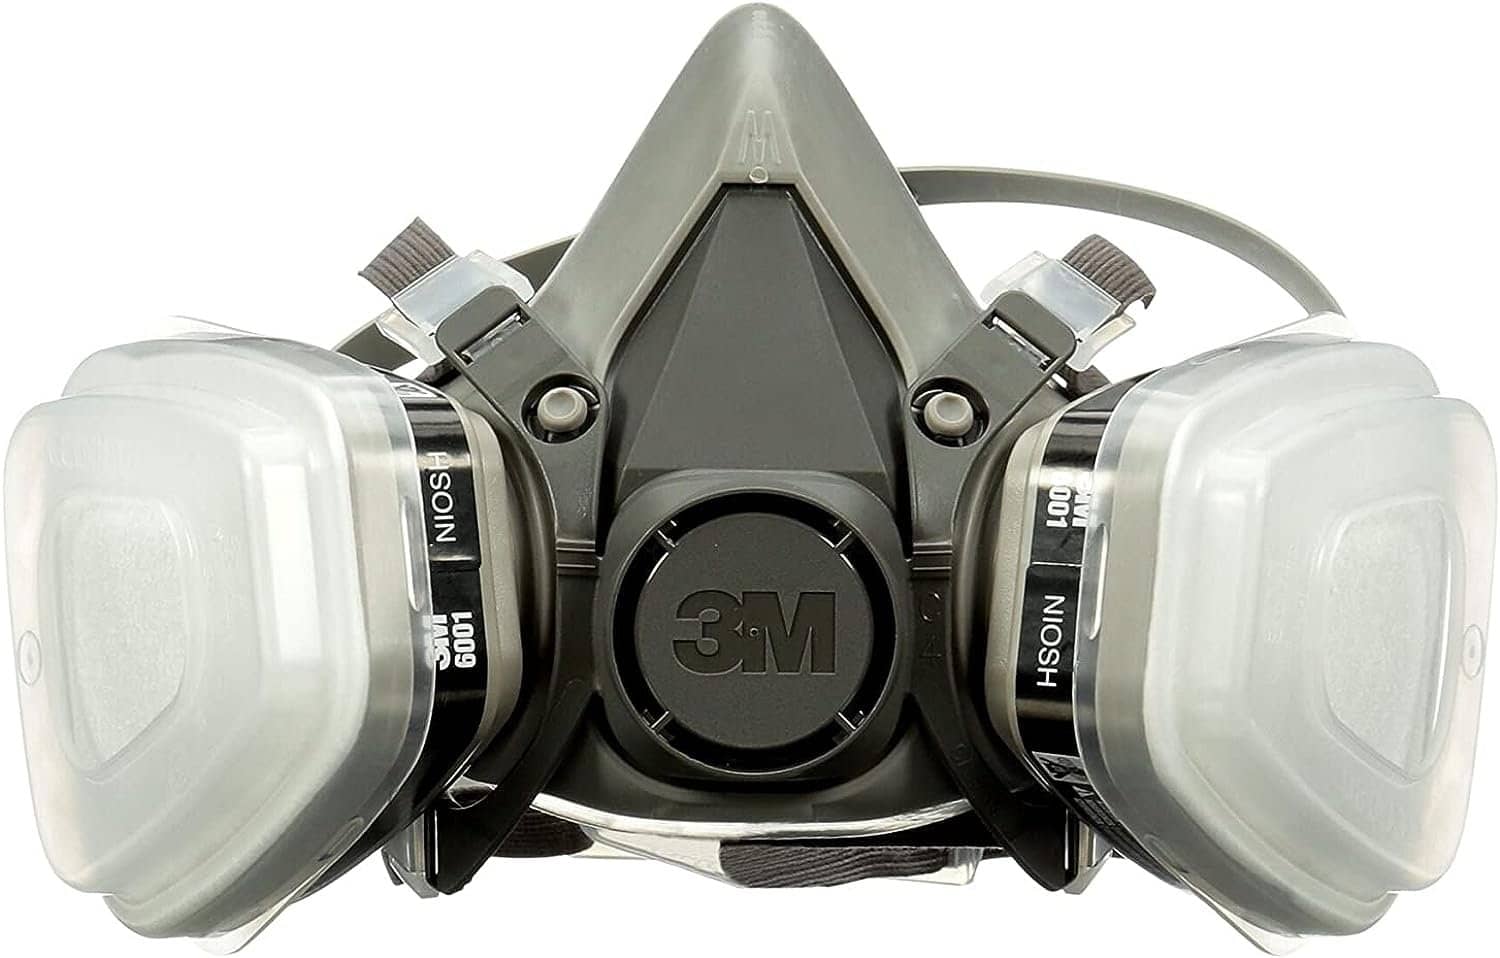 3m performance paint project respirator review